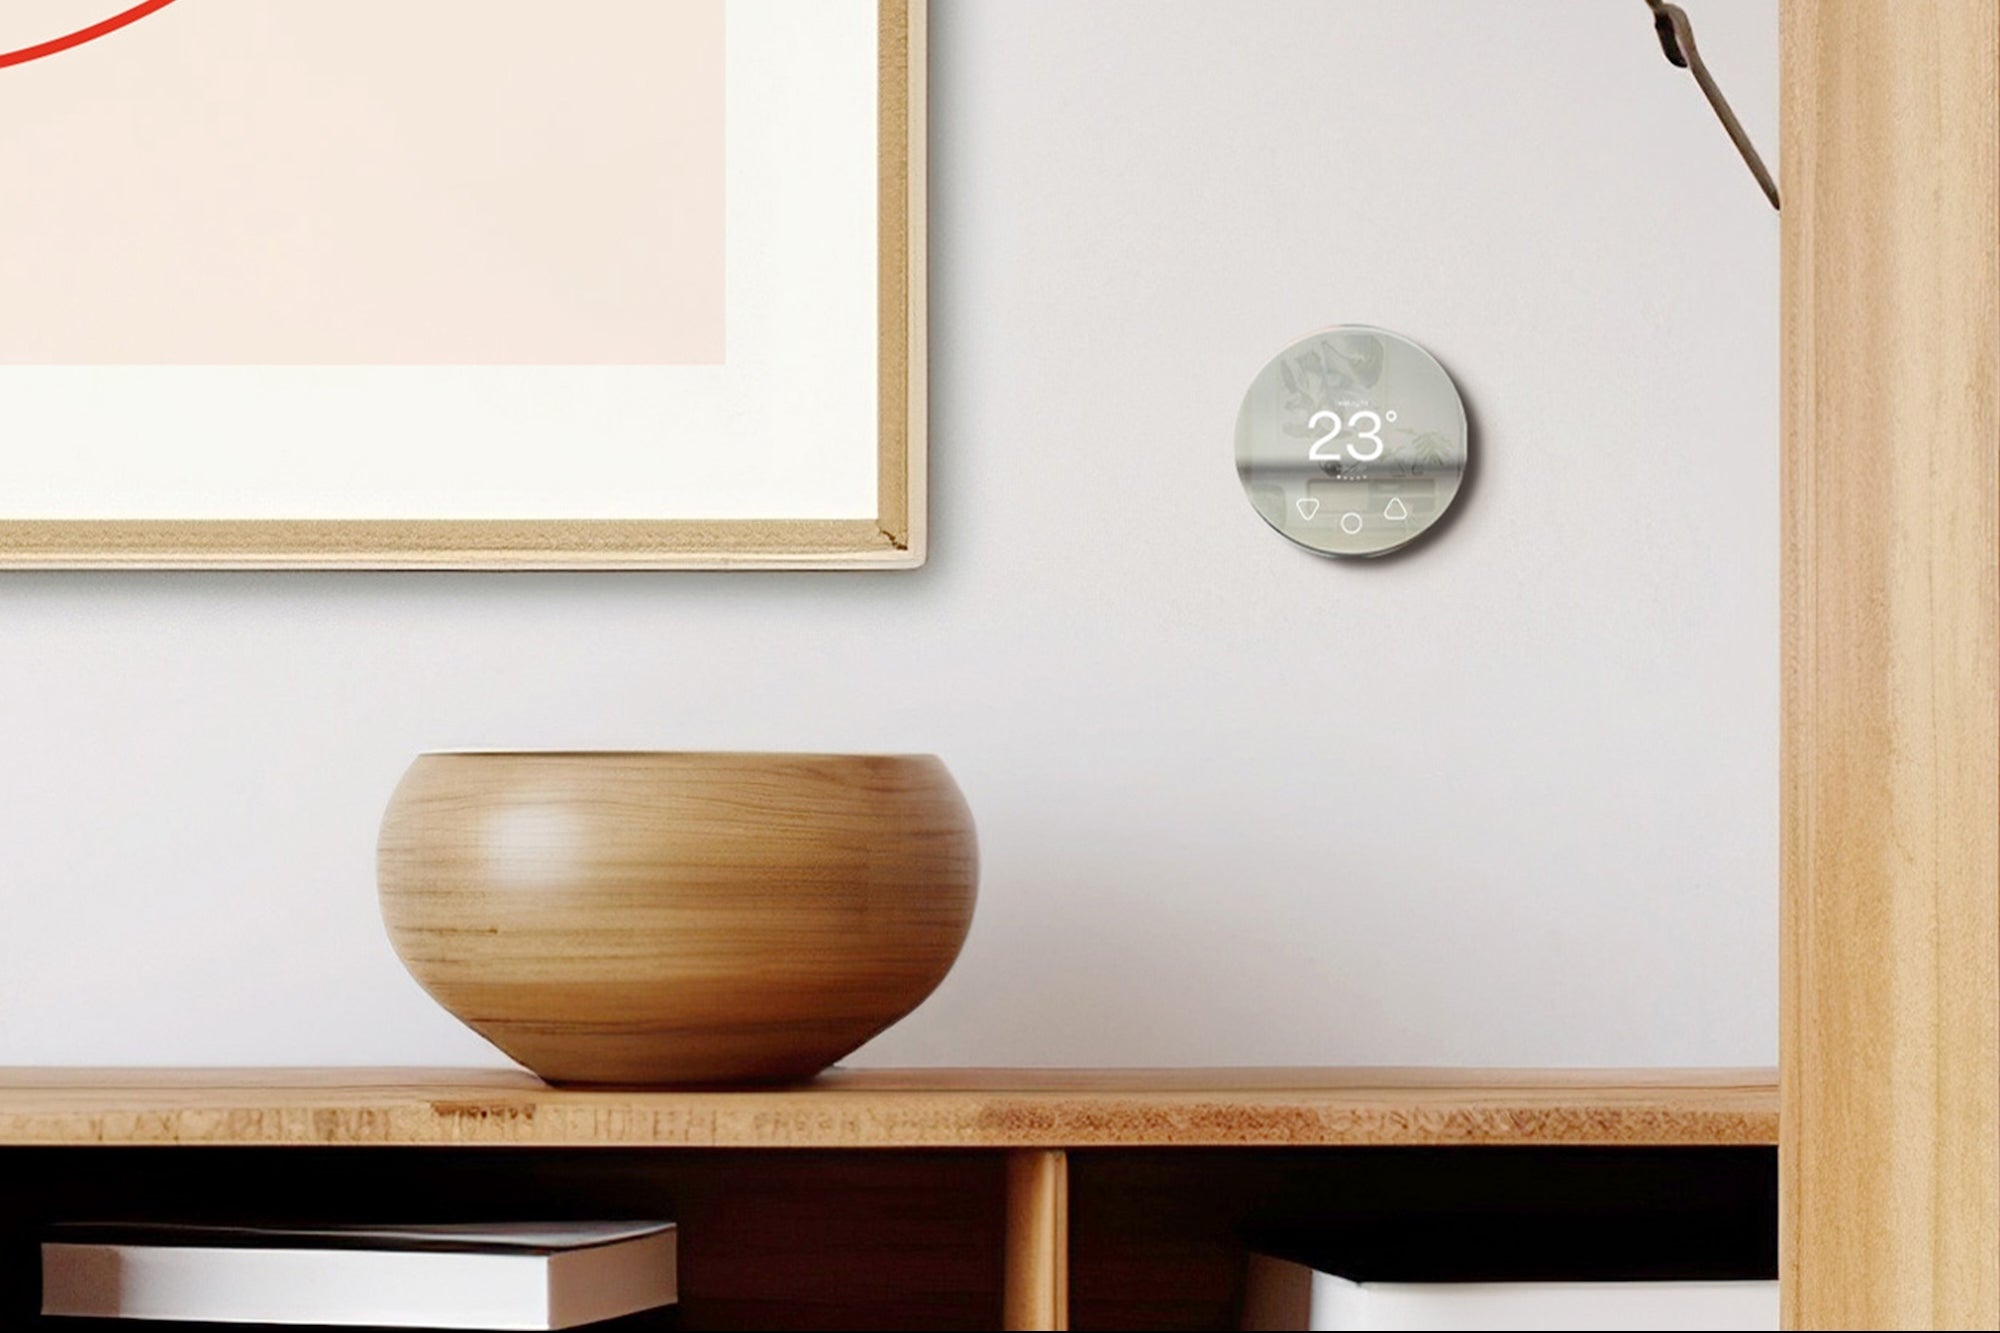 Keep the Office Cool This Summer with $10 Off a Klima Thermostat